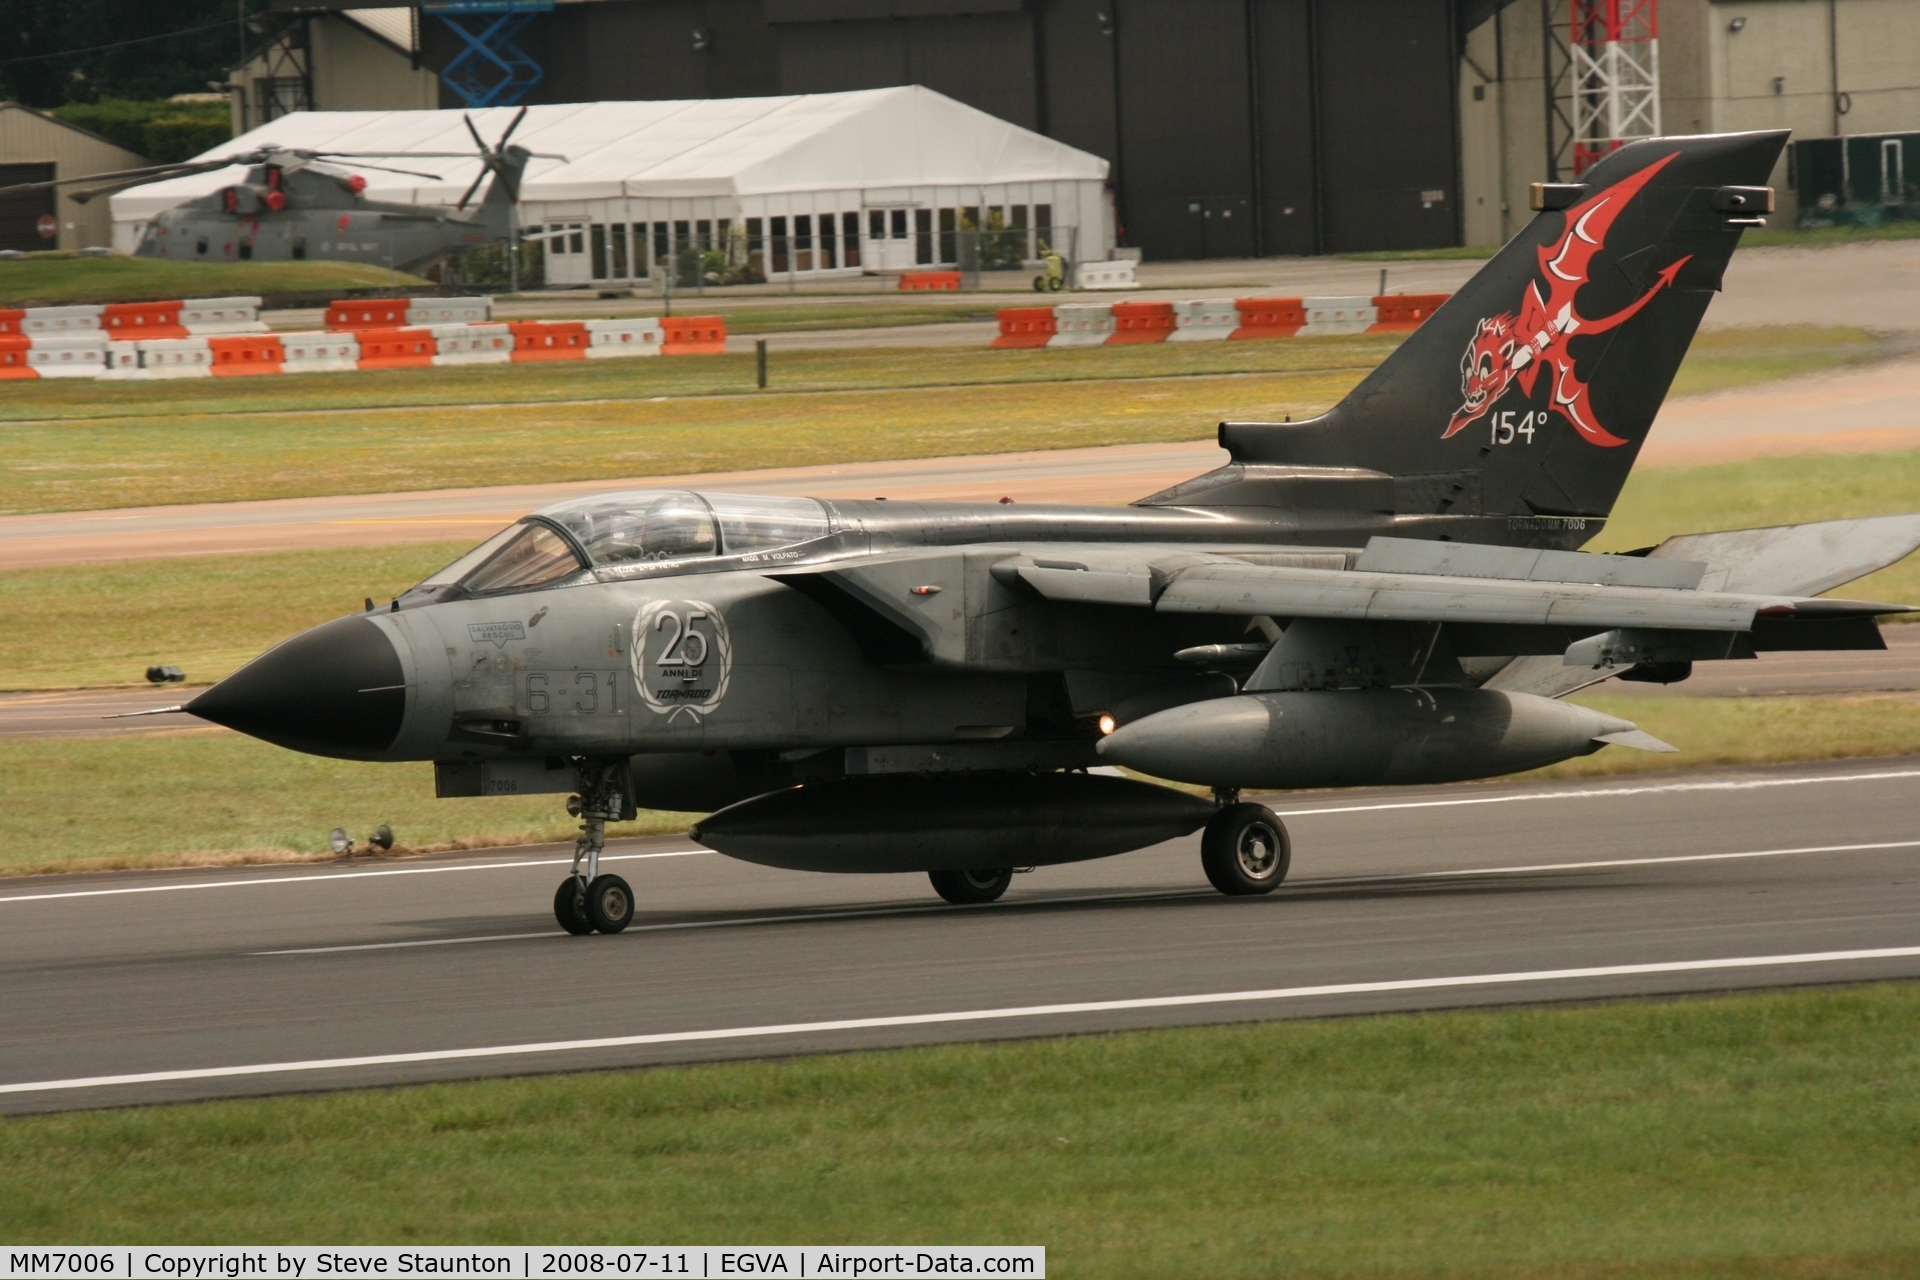 MM7006, 1982 Panavia Tornado IDS C/N 102/IS005/5008, Taken at the Royal International Air Tattoo 2008 during arrivals and departures (show days cancelled due to bad weather)